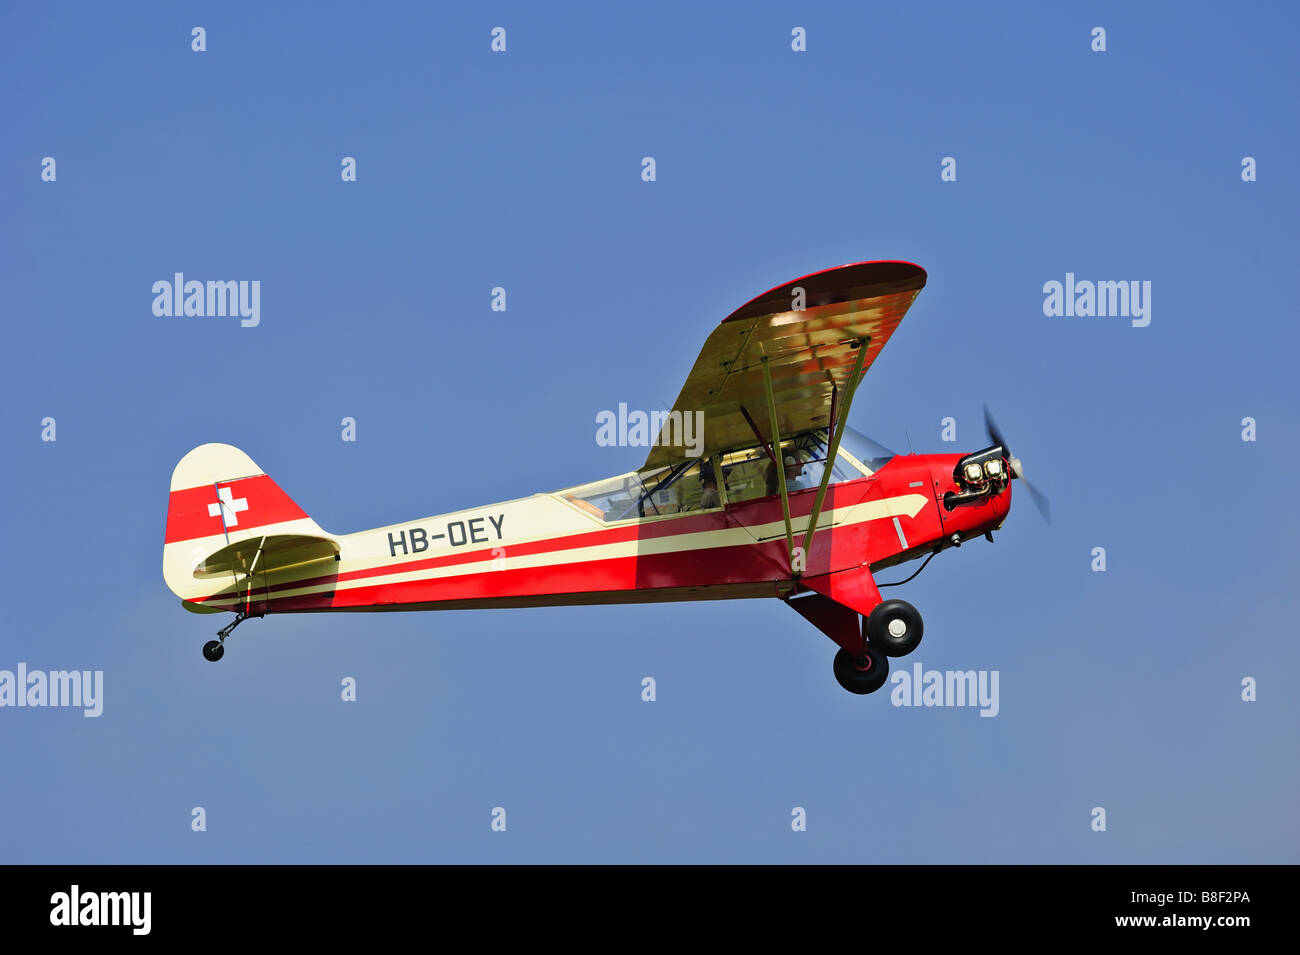 A light aircraft taking off into a clear blue sky. Space for text in the sky. Stock Photo